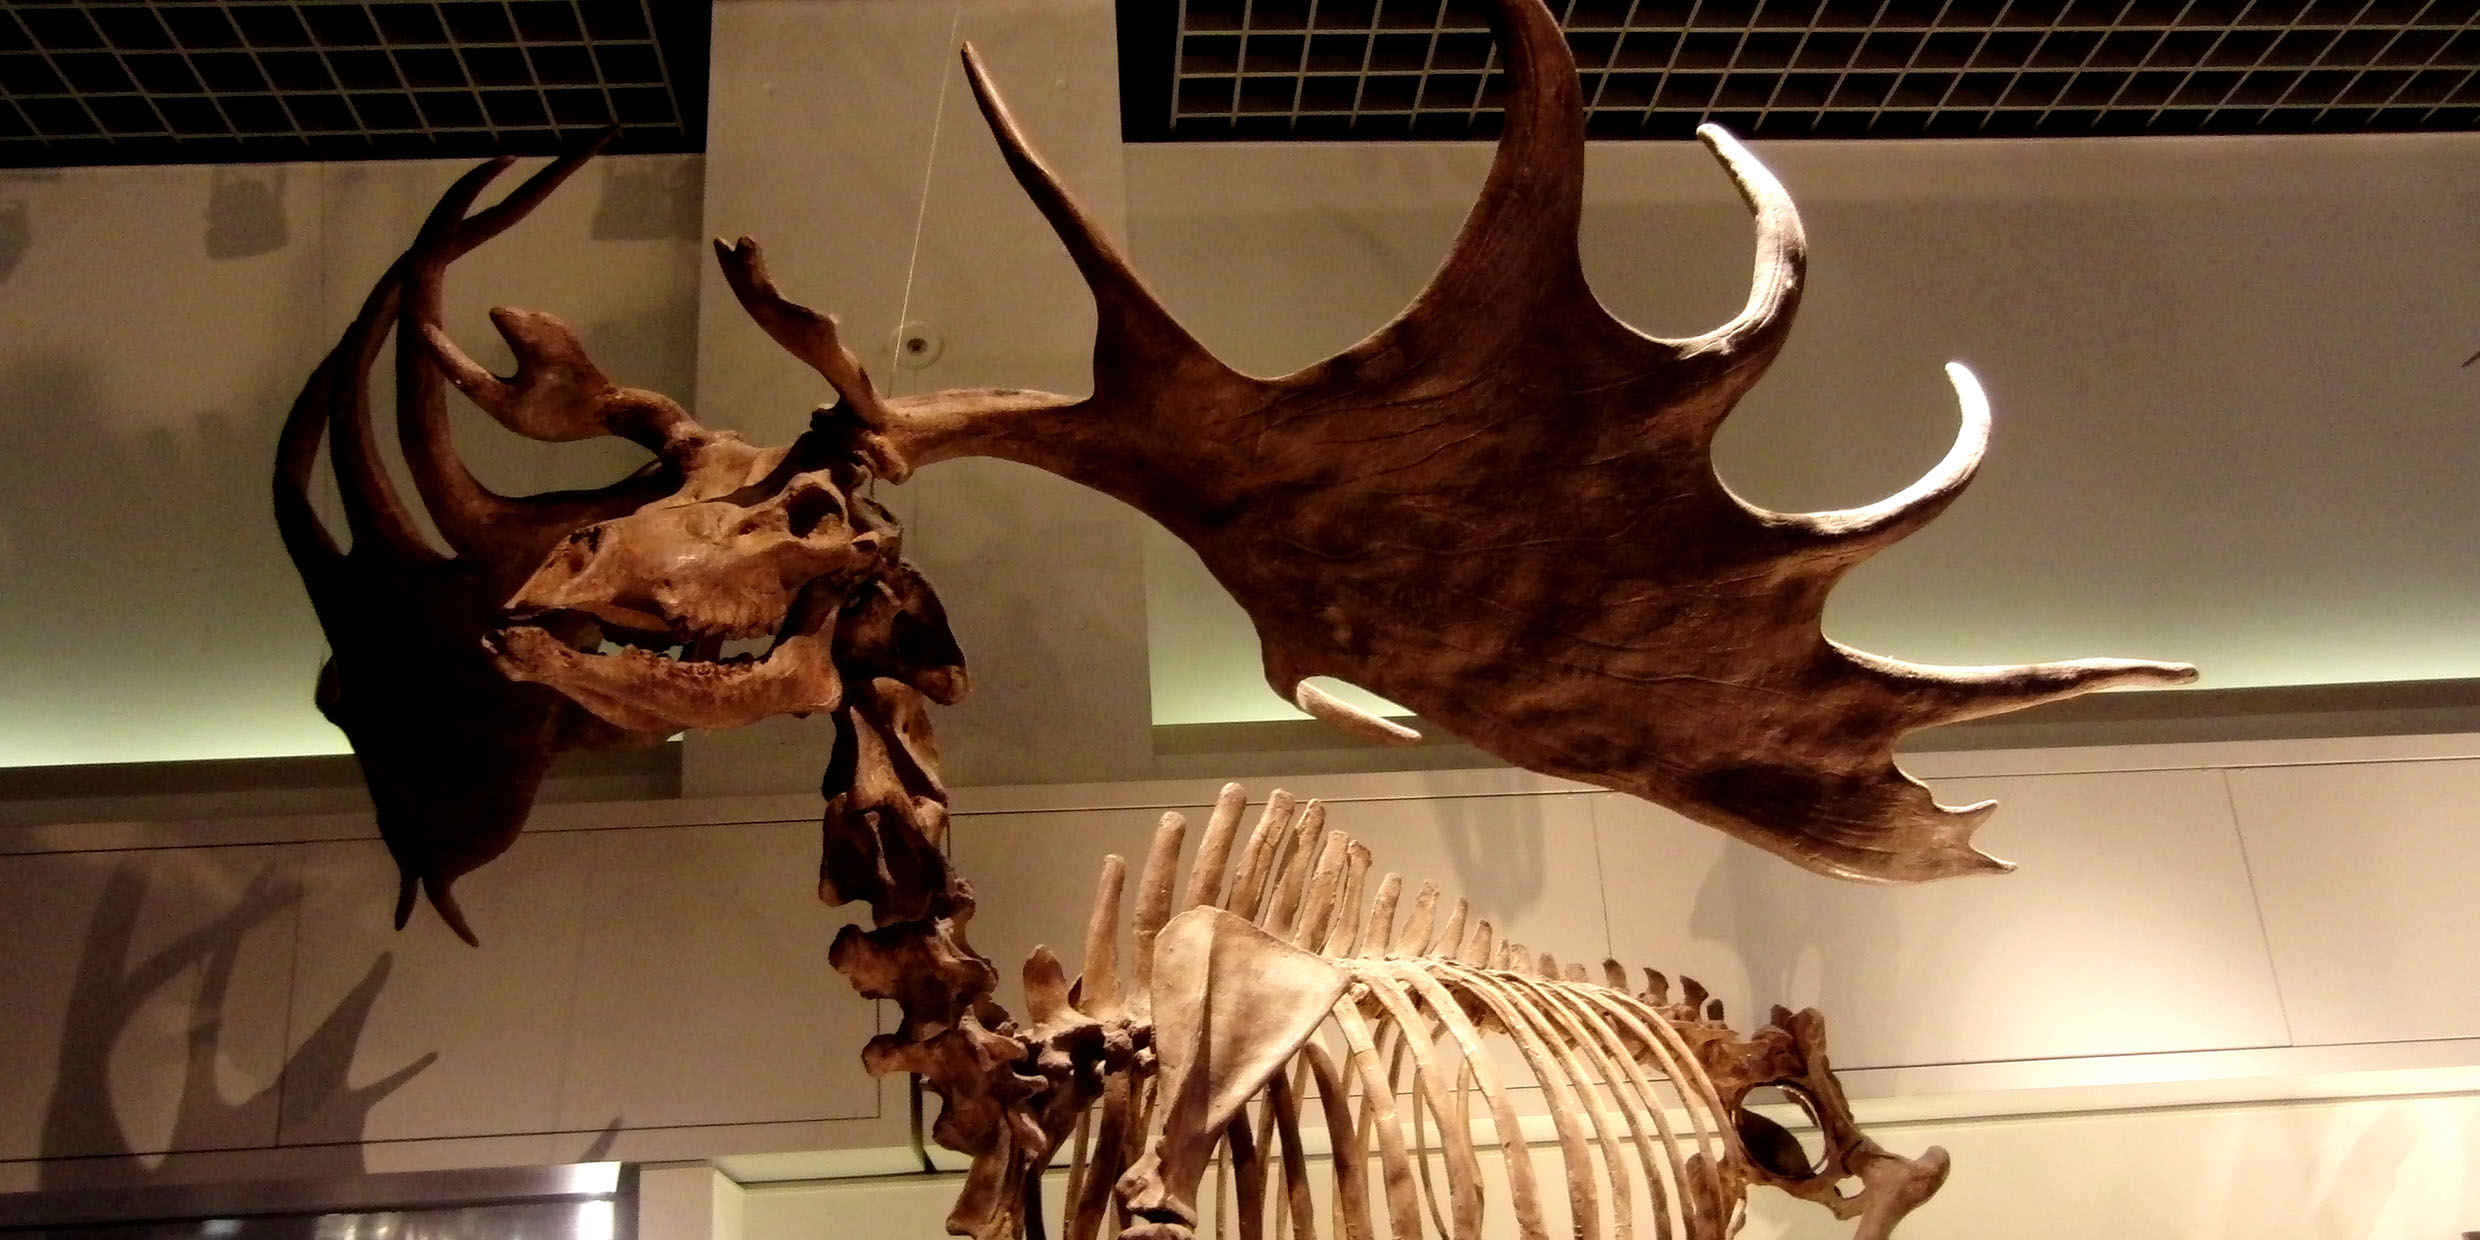 Image of a fossilized skeleton of an Irish elk with large antlers